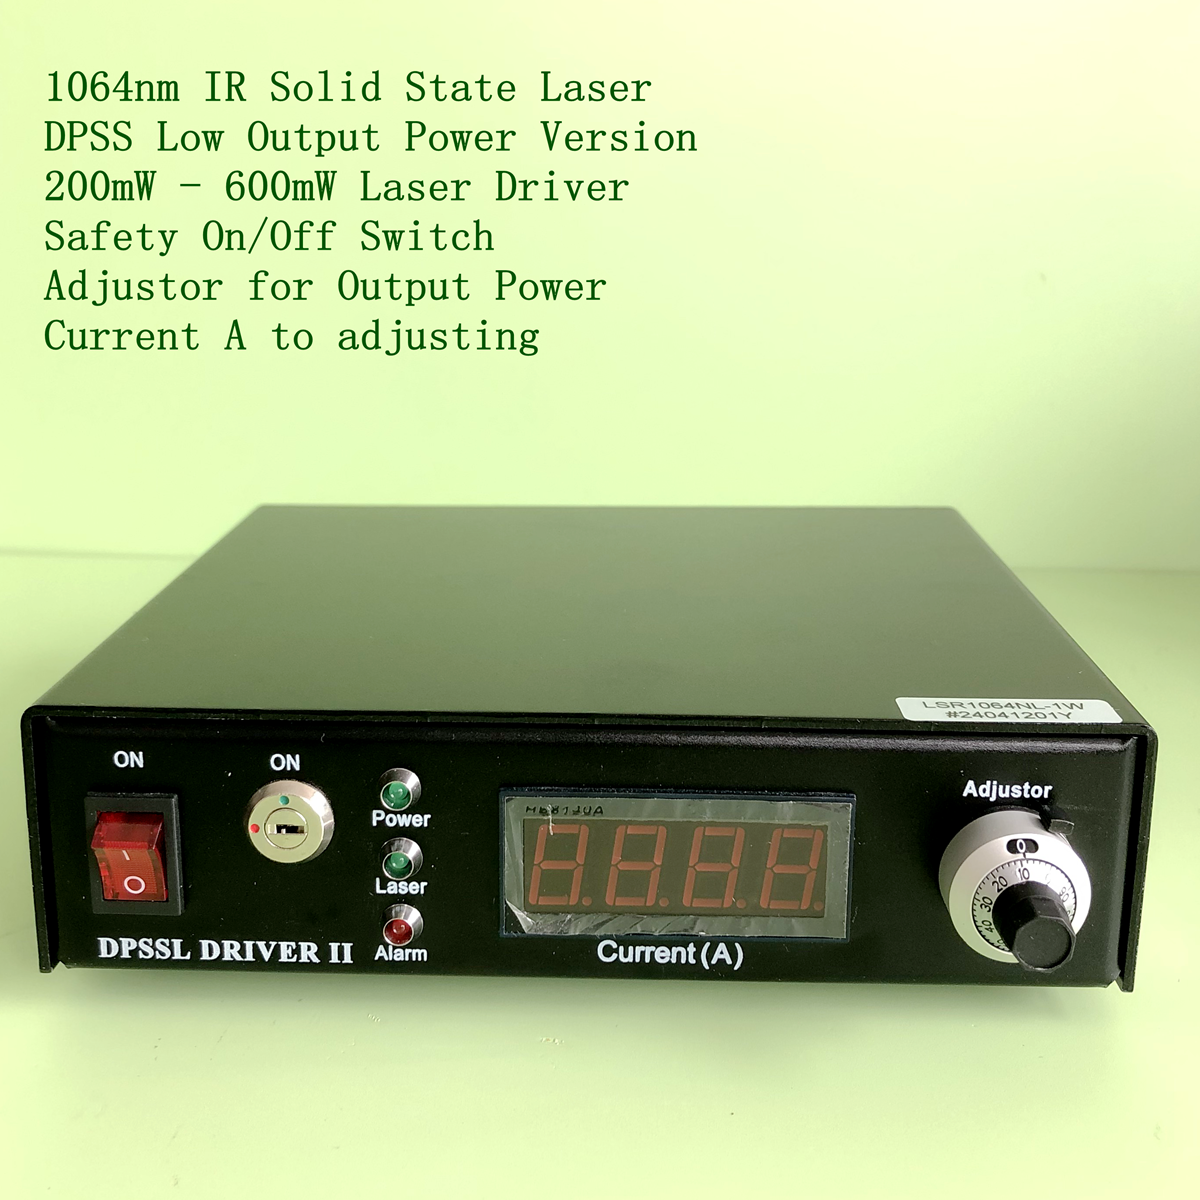 Modal Additional Images for 1064nm IR Solid State Laser DPSS Low Output Power Version 200mW - 600mW